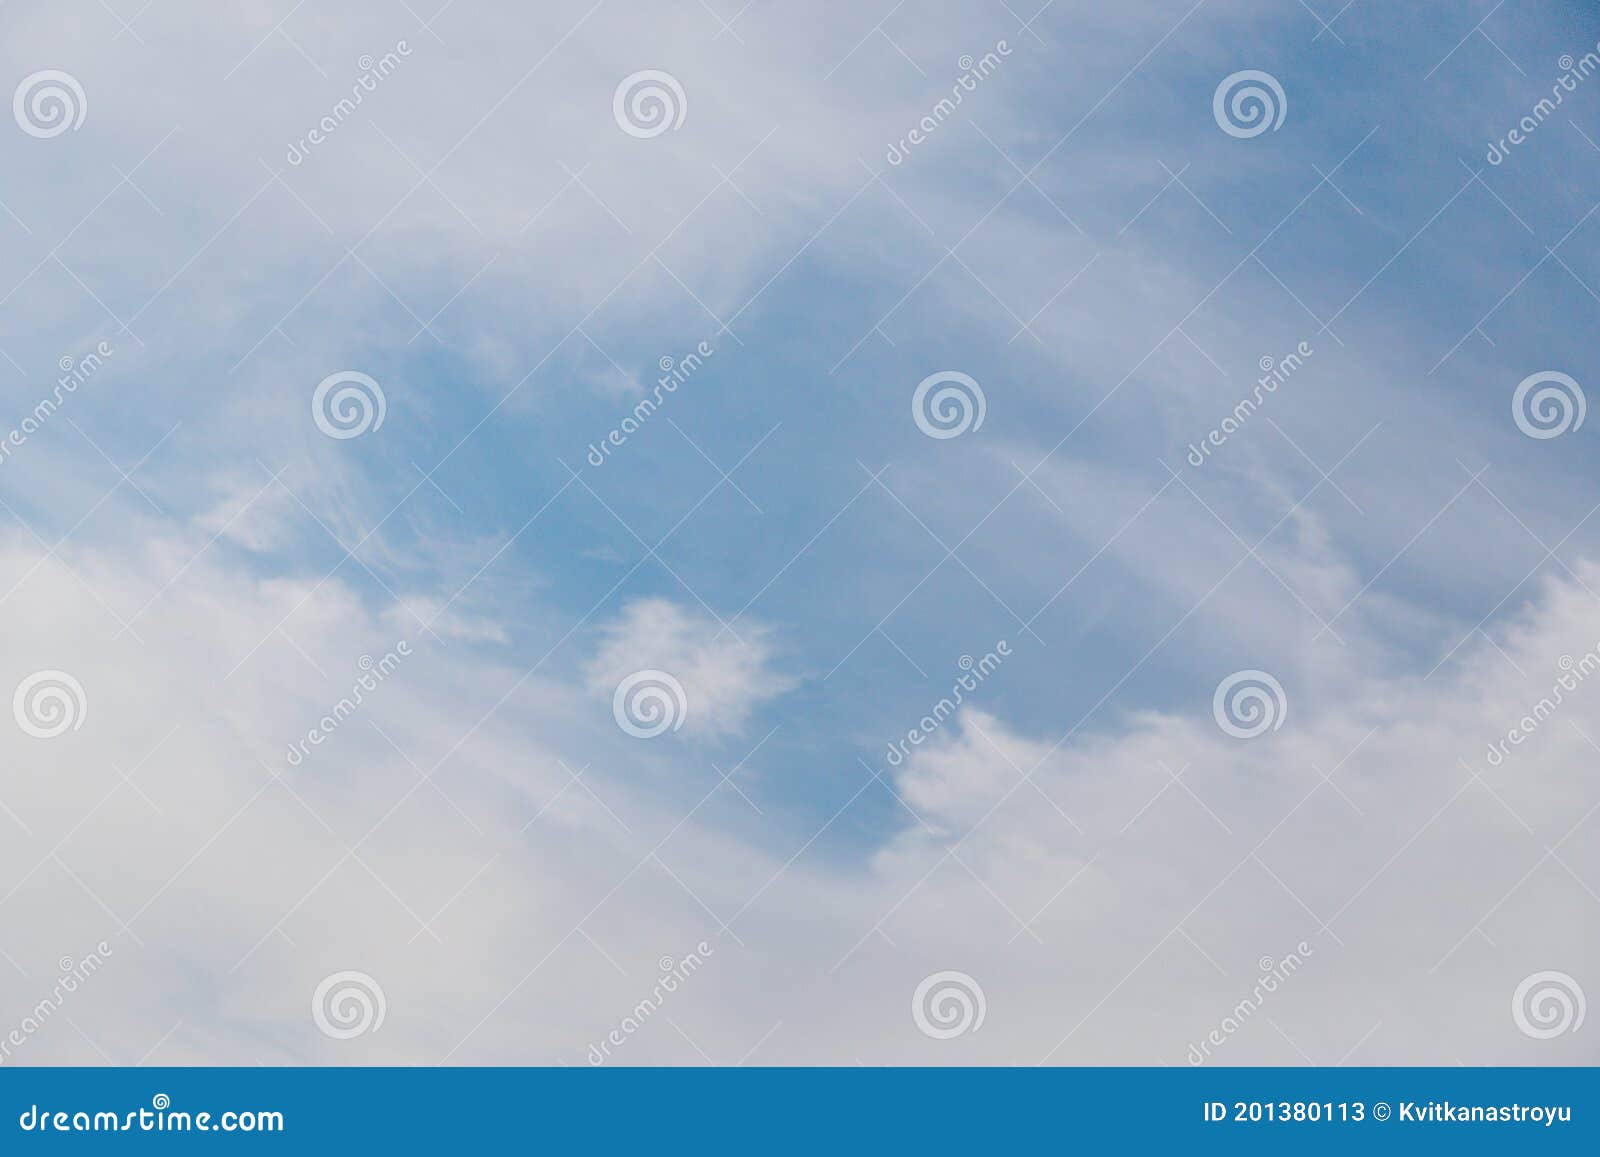 blue sky with cirro cumulus white clouds. sky background